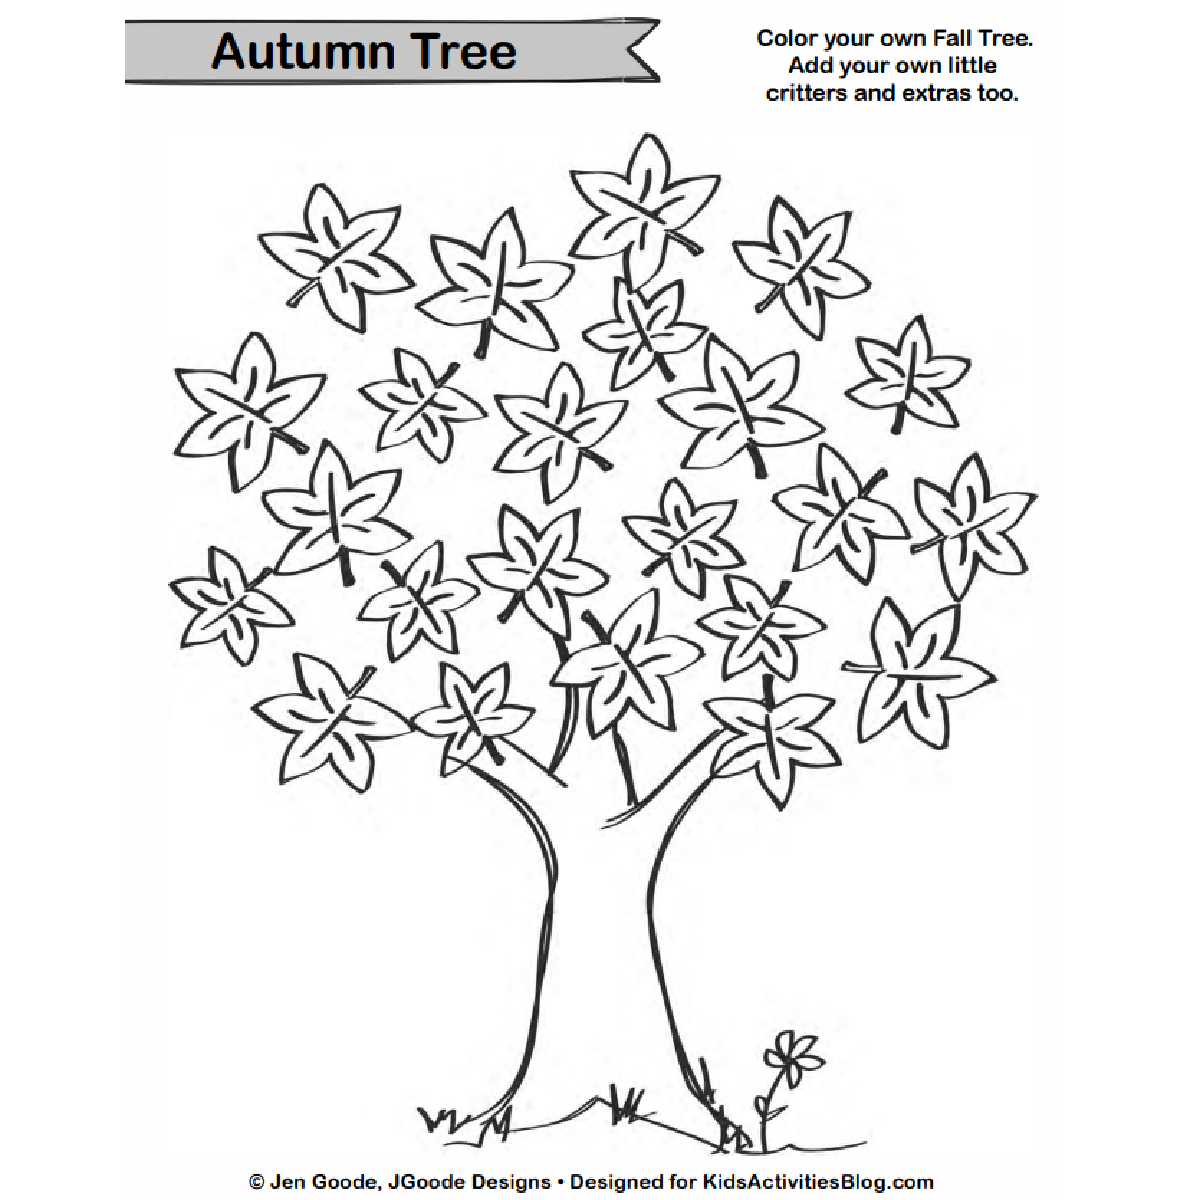 Free fall tree coloring page to celebrate autumn colors kids activities blog